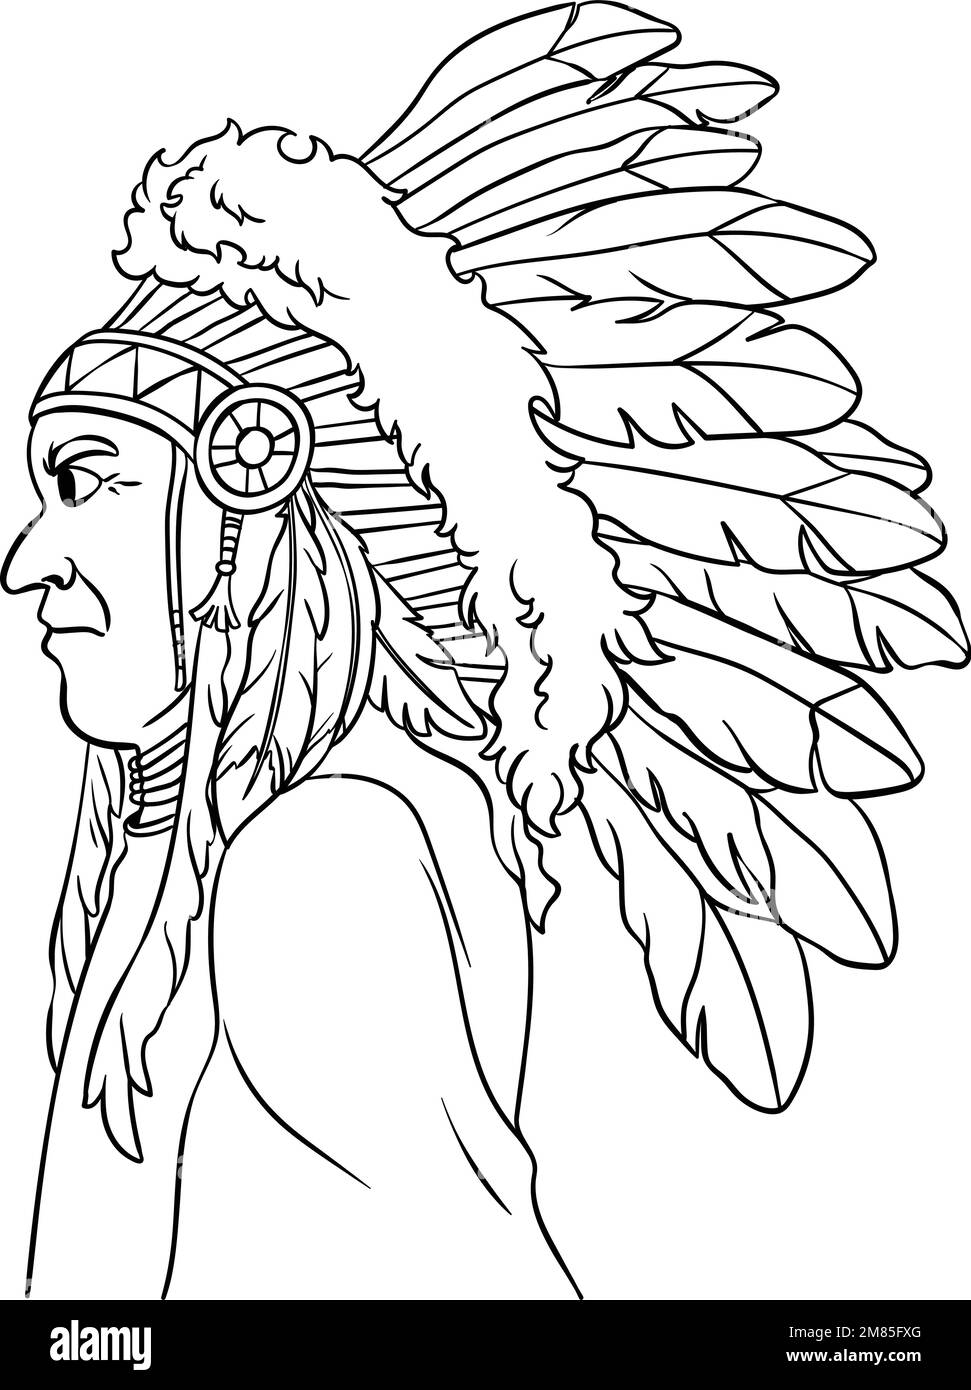 Native American Indian Chieftain Isolated Coloring Stock Vector